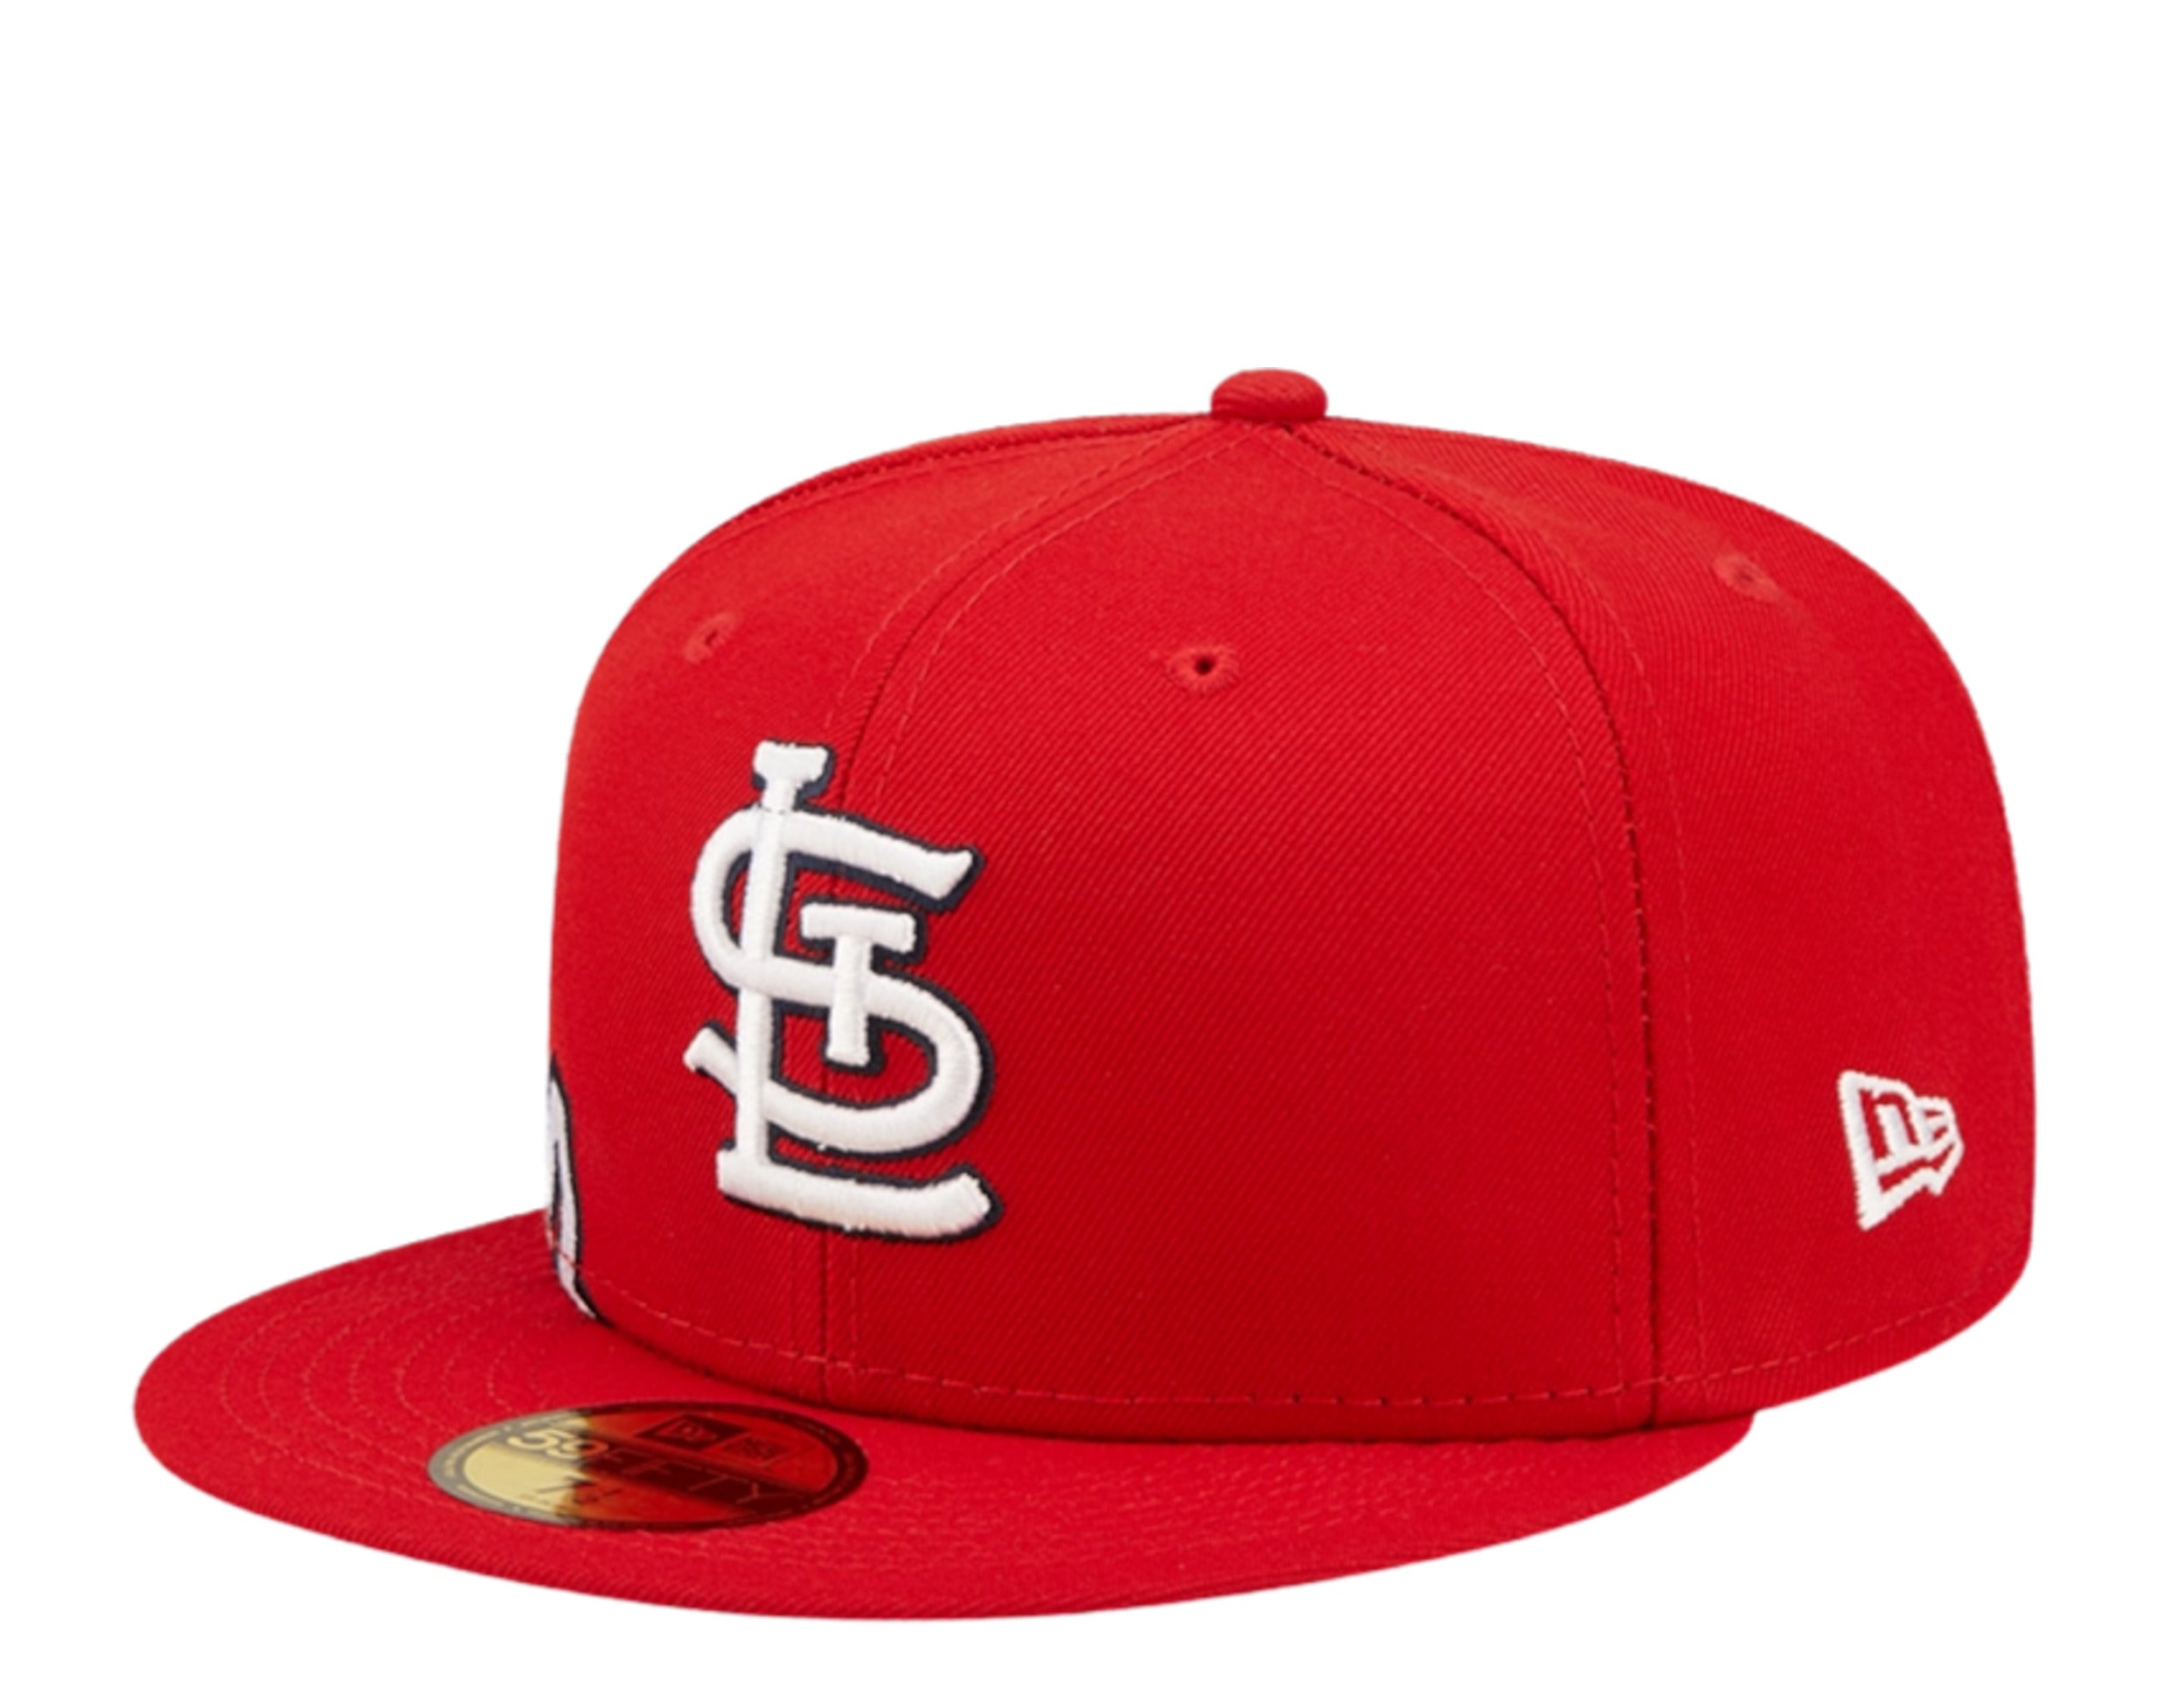 New Cardinals hat features toasted ravioli, Gateway Arch